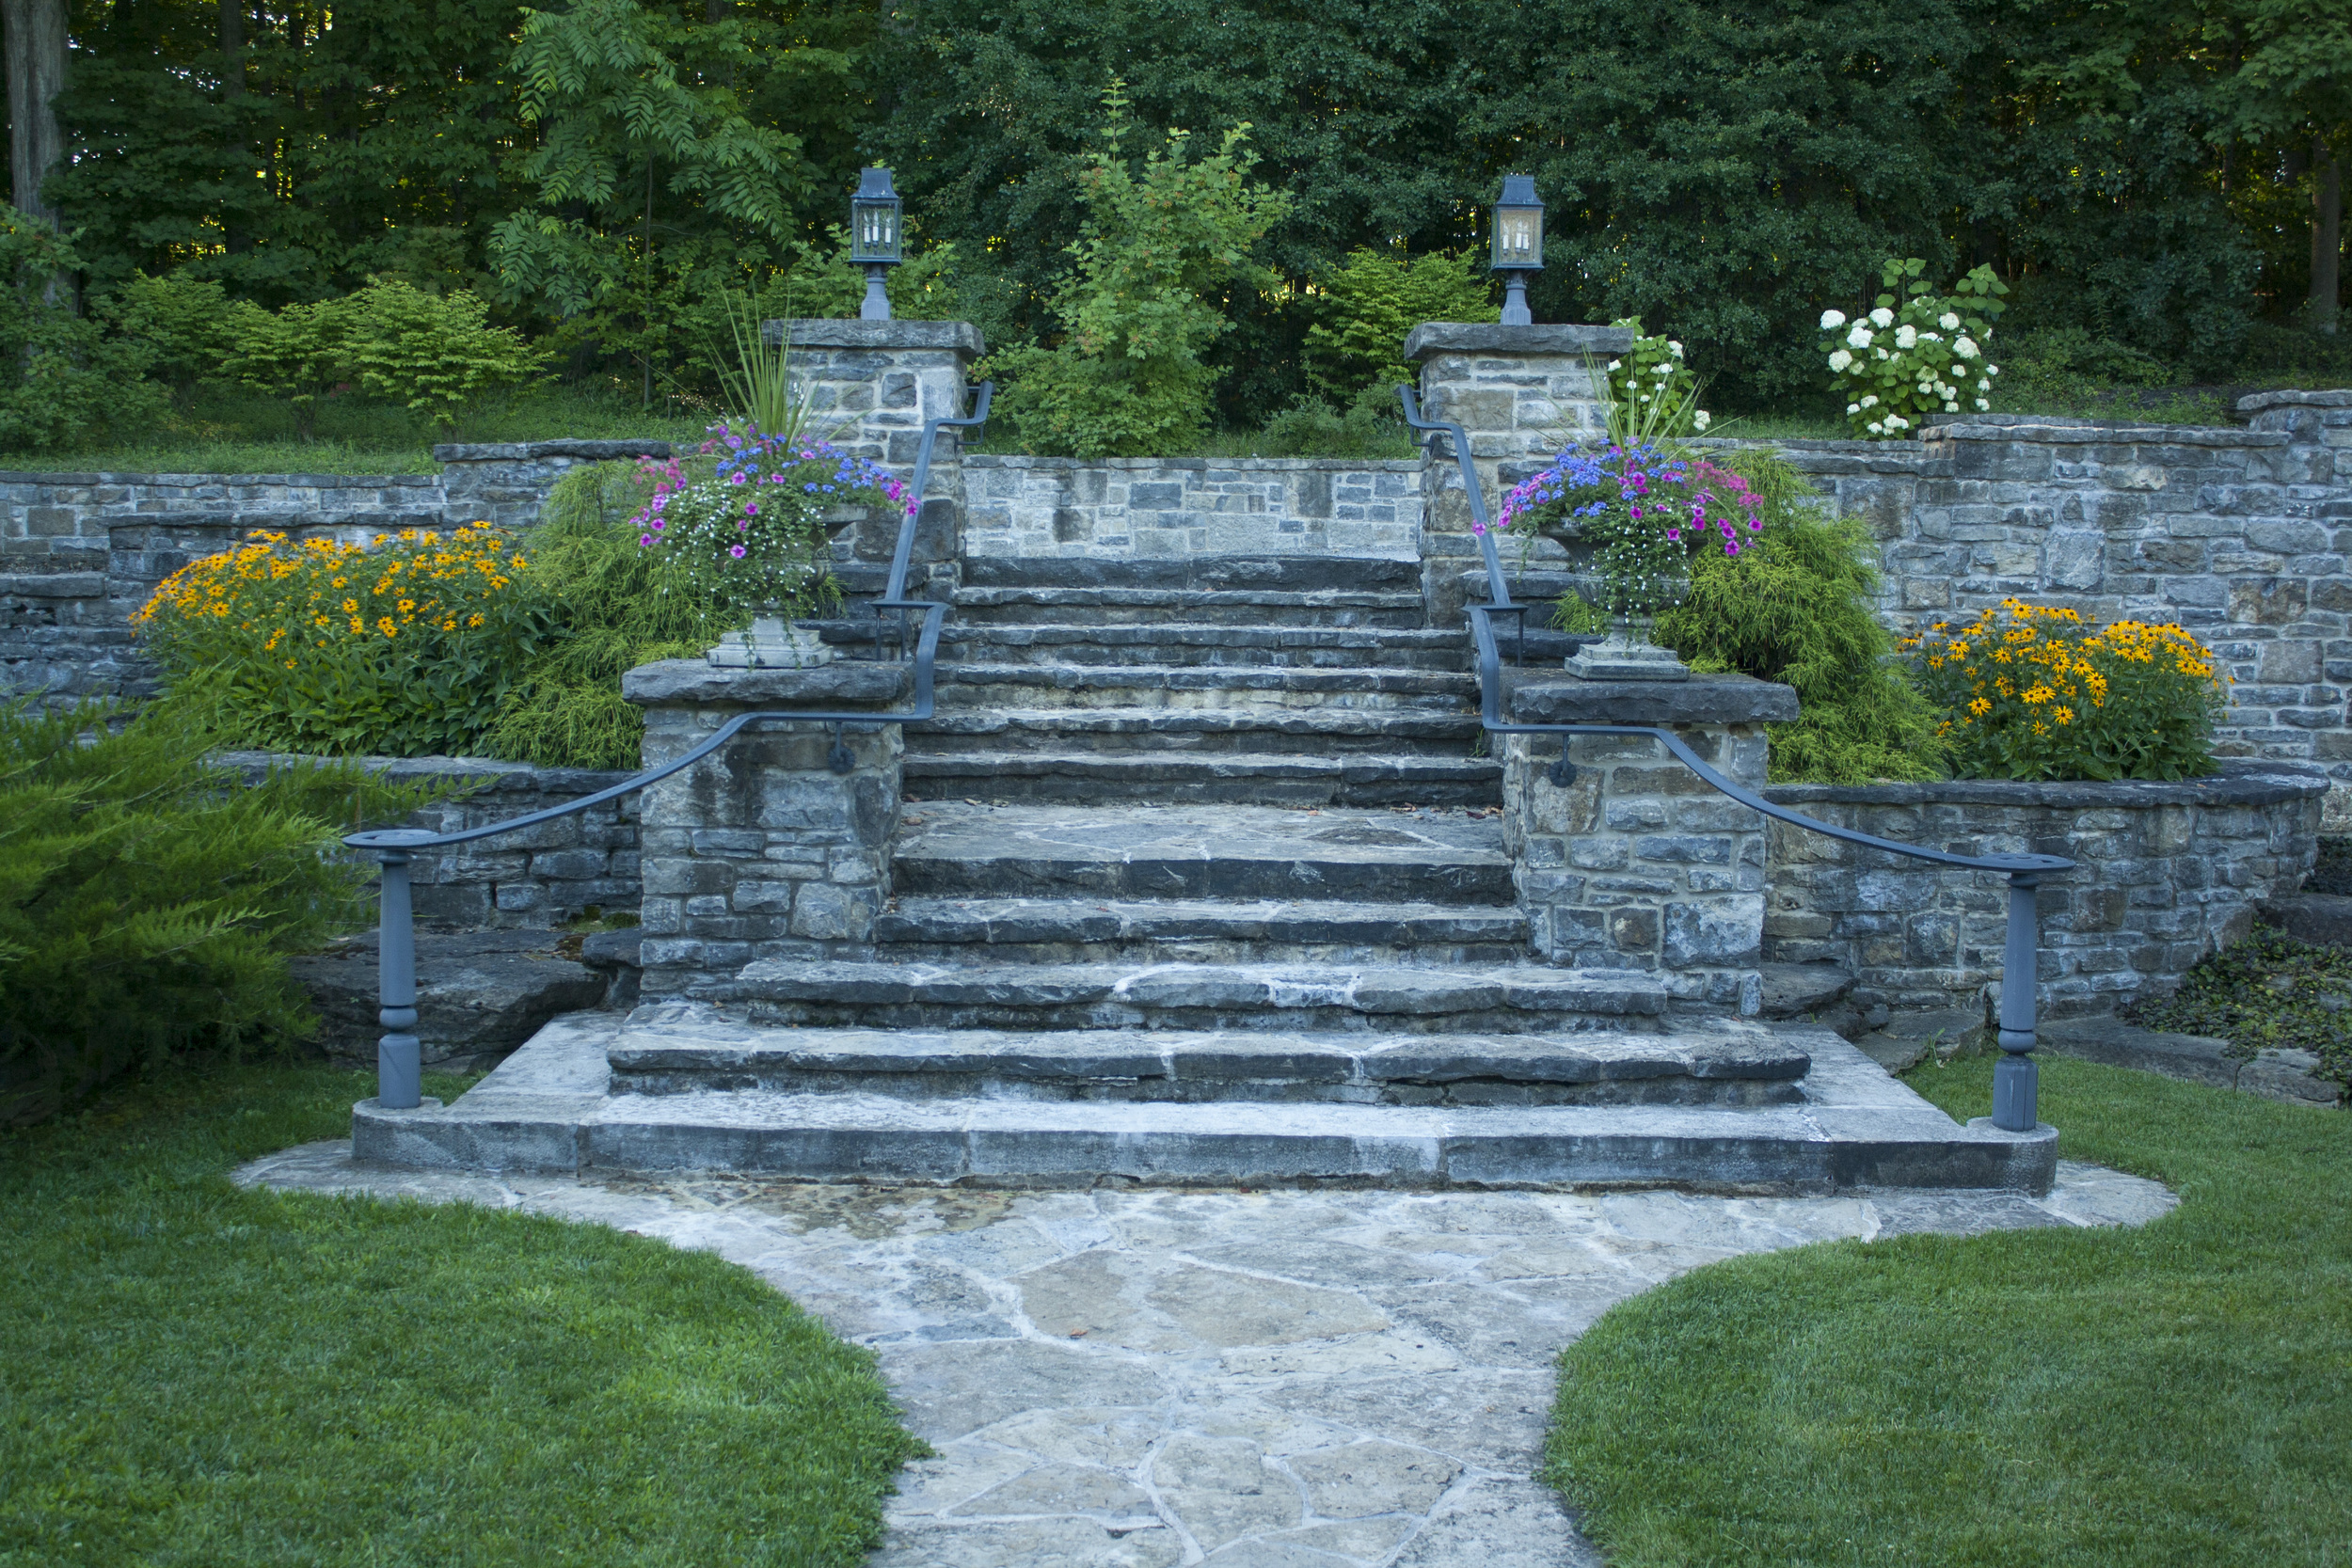 New Home With A Heritage Feel | Stone Steps | Landscape Architecture | Riverview Design Solutions | Prescott, Ontario, Canada